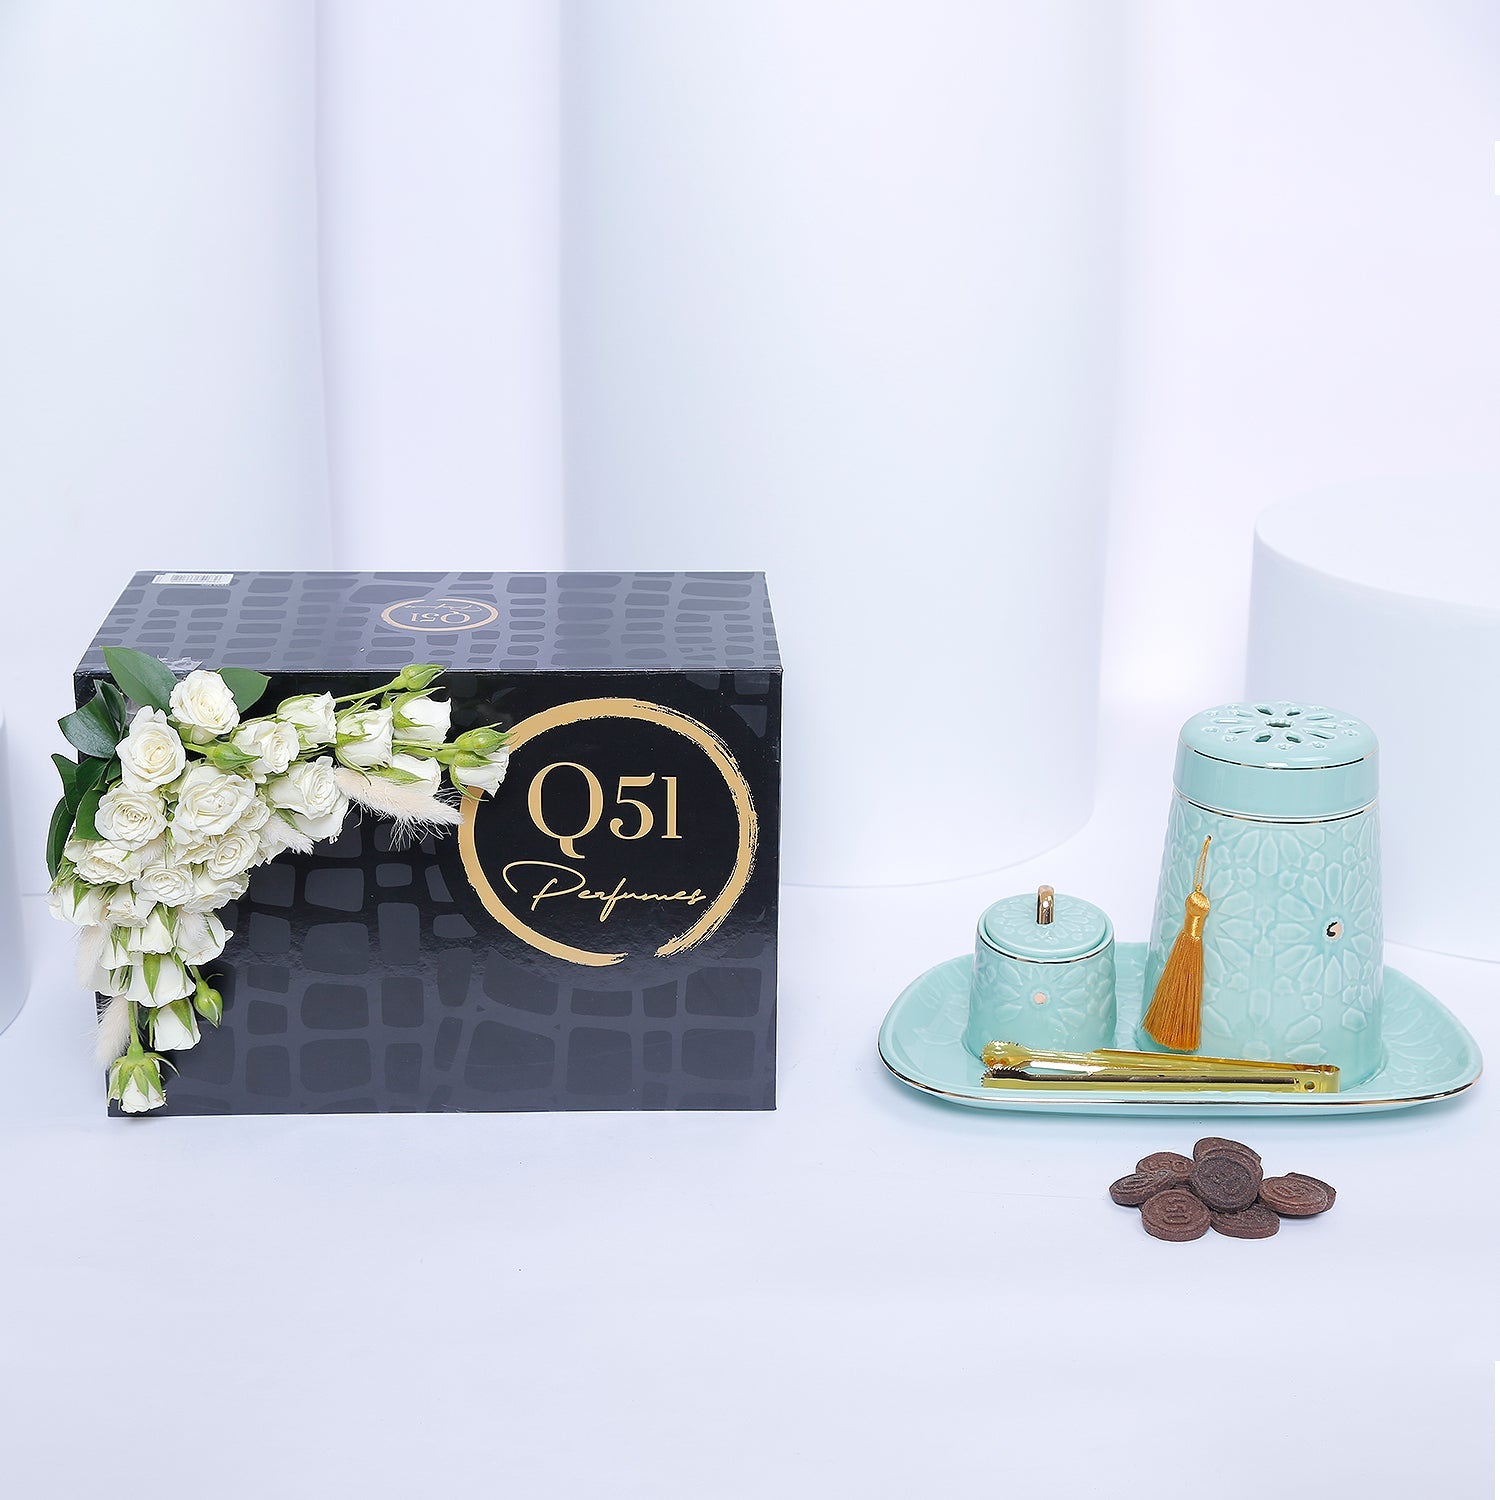 Teal Incense Burner from Q51 Perfumes